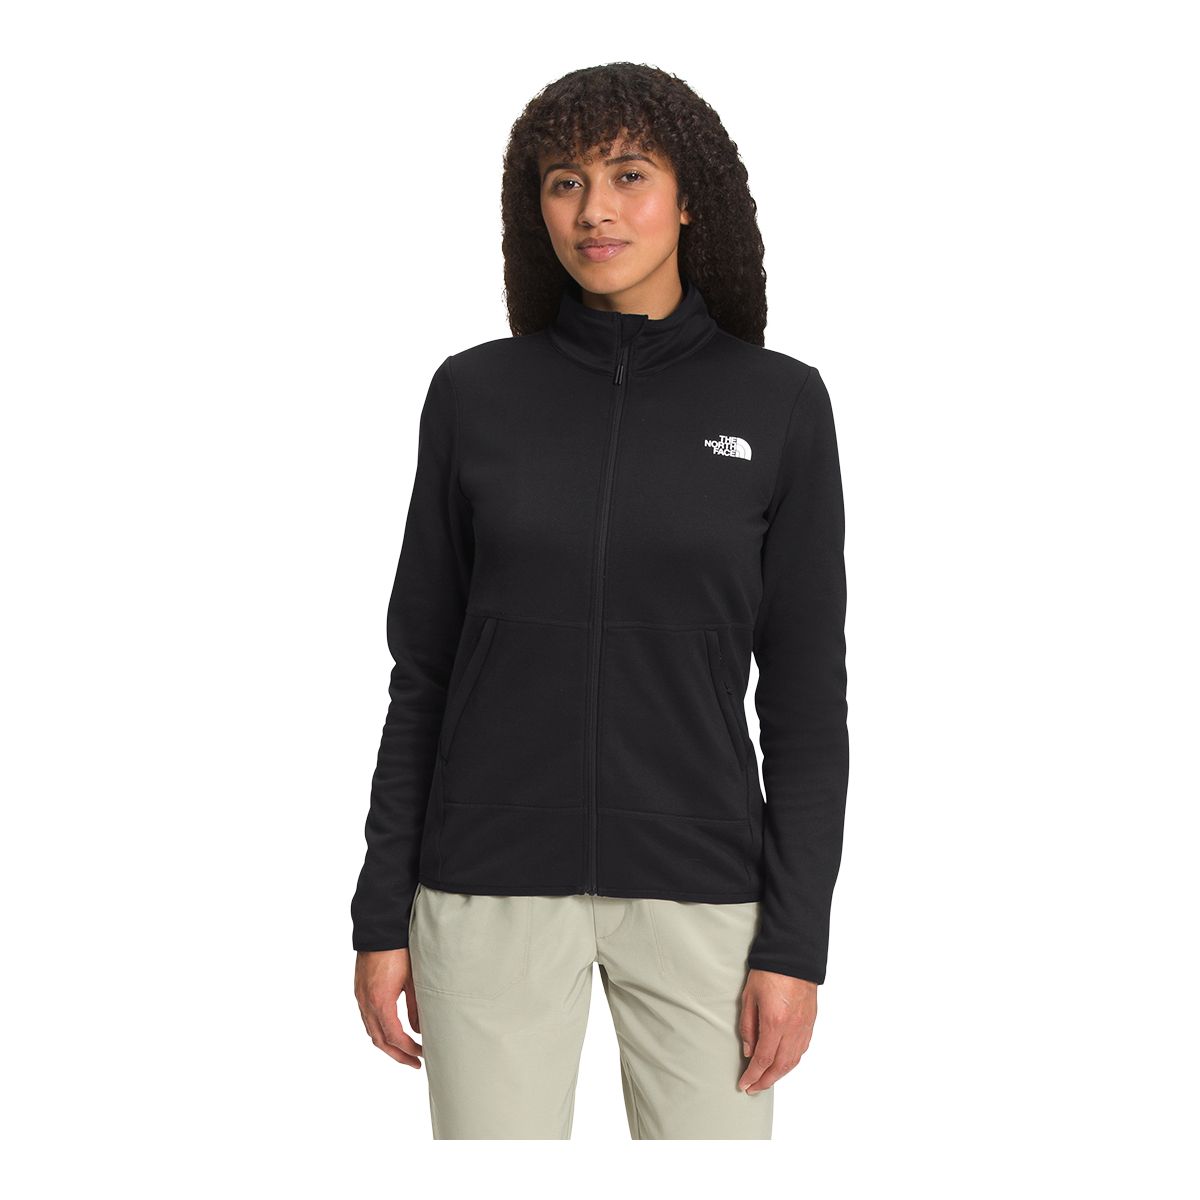 Image of The North Face Women's Canyonlands Full Zip Hoodie